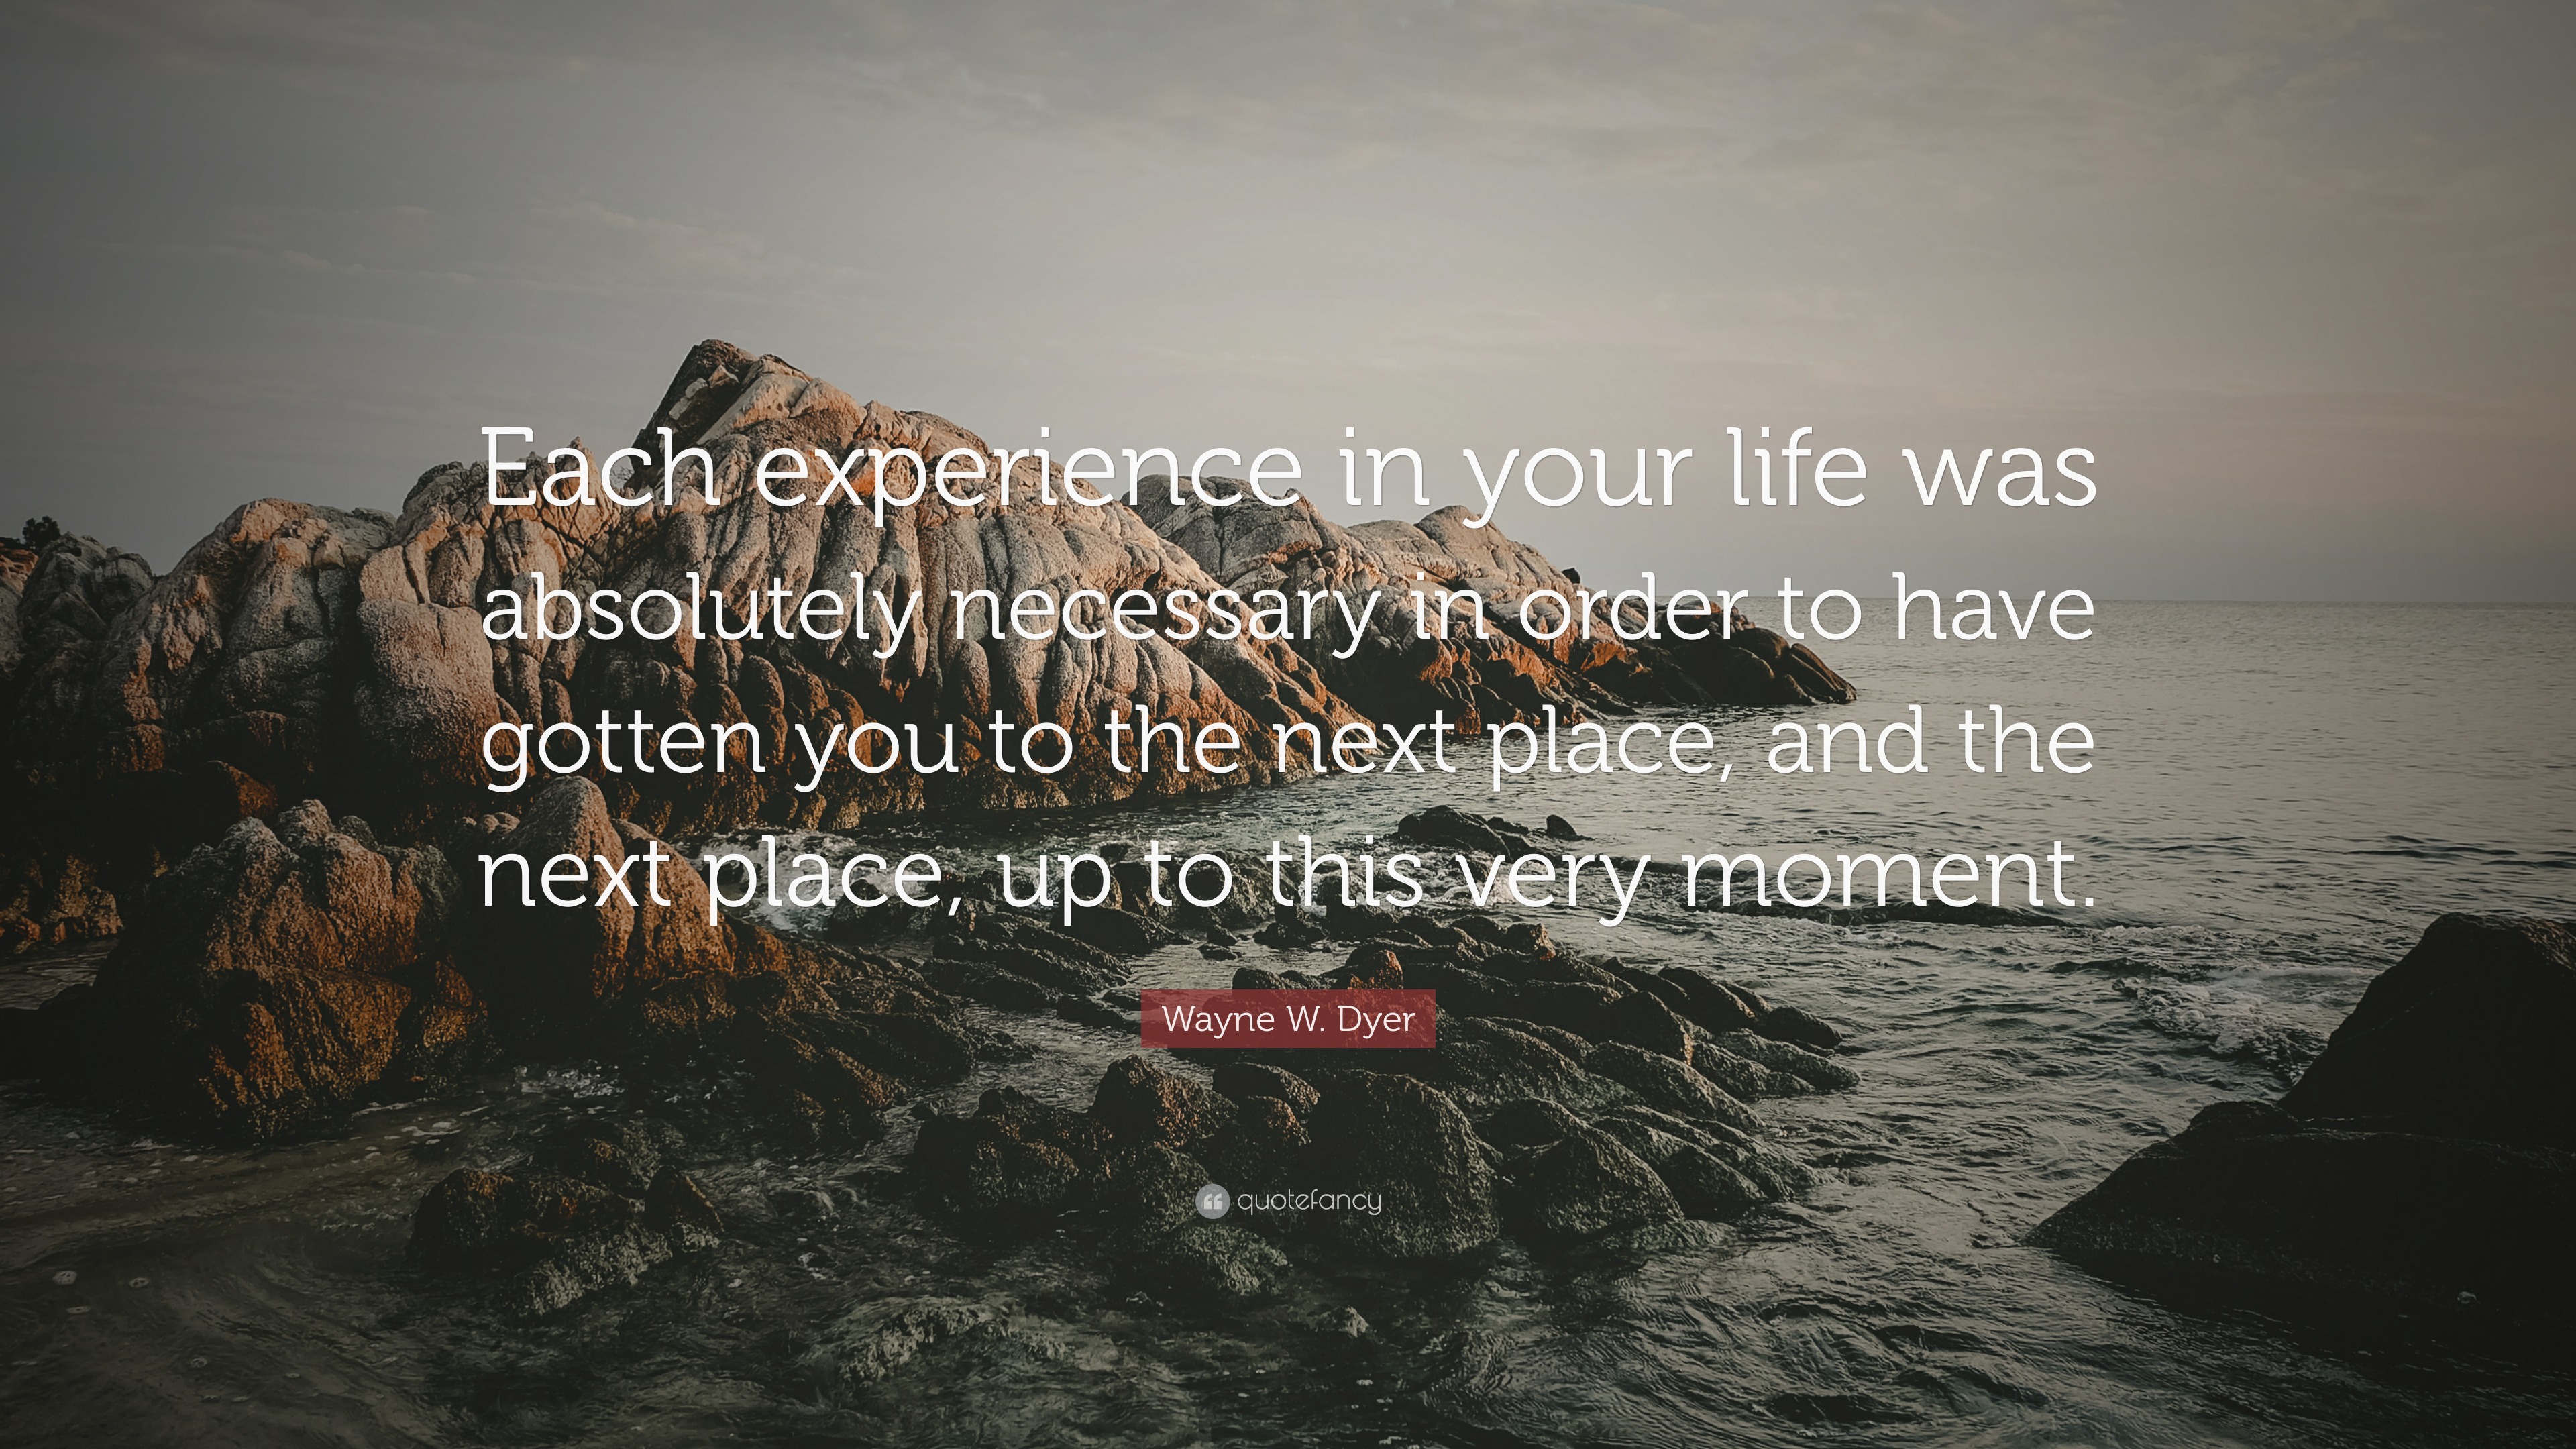 Wayne W. Dyer Quote: “Each experience in your life was absolutely ...